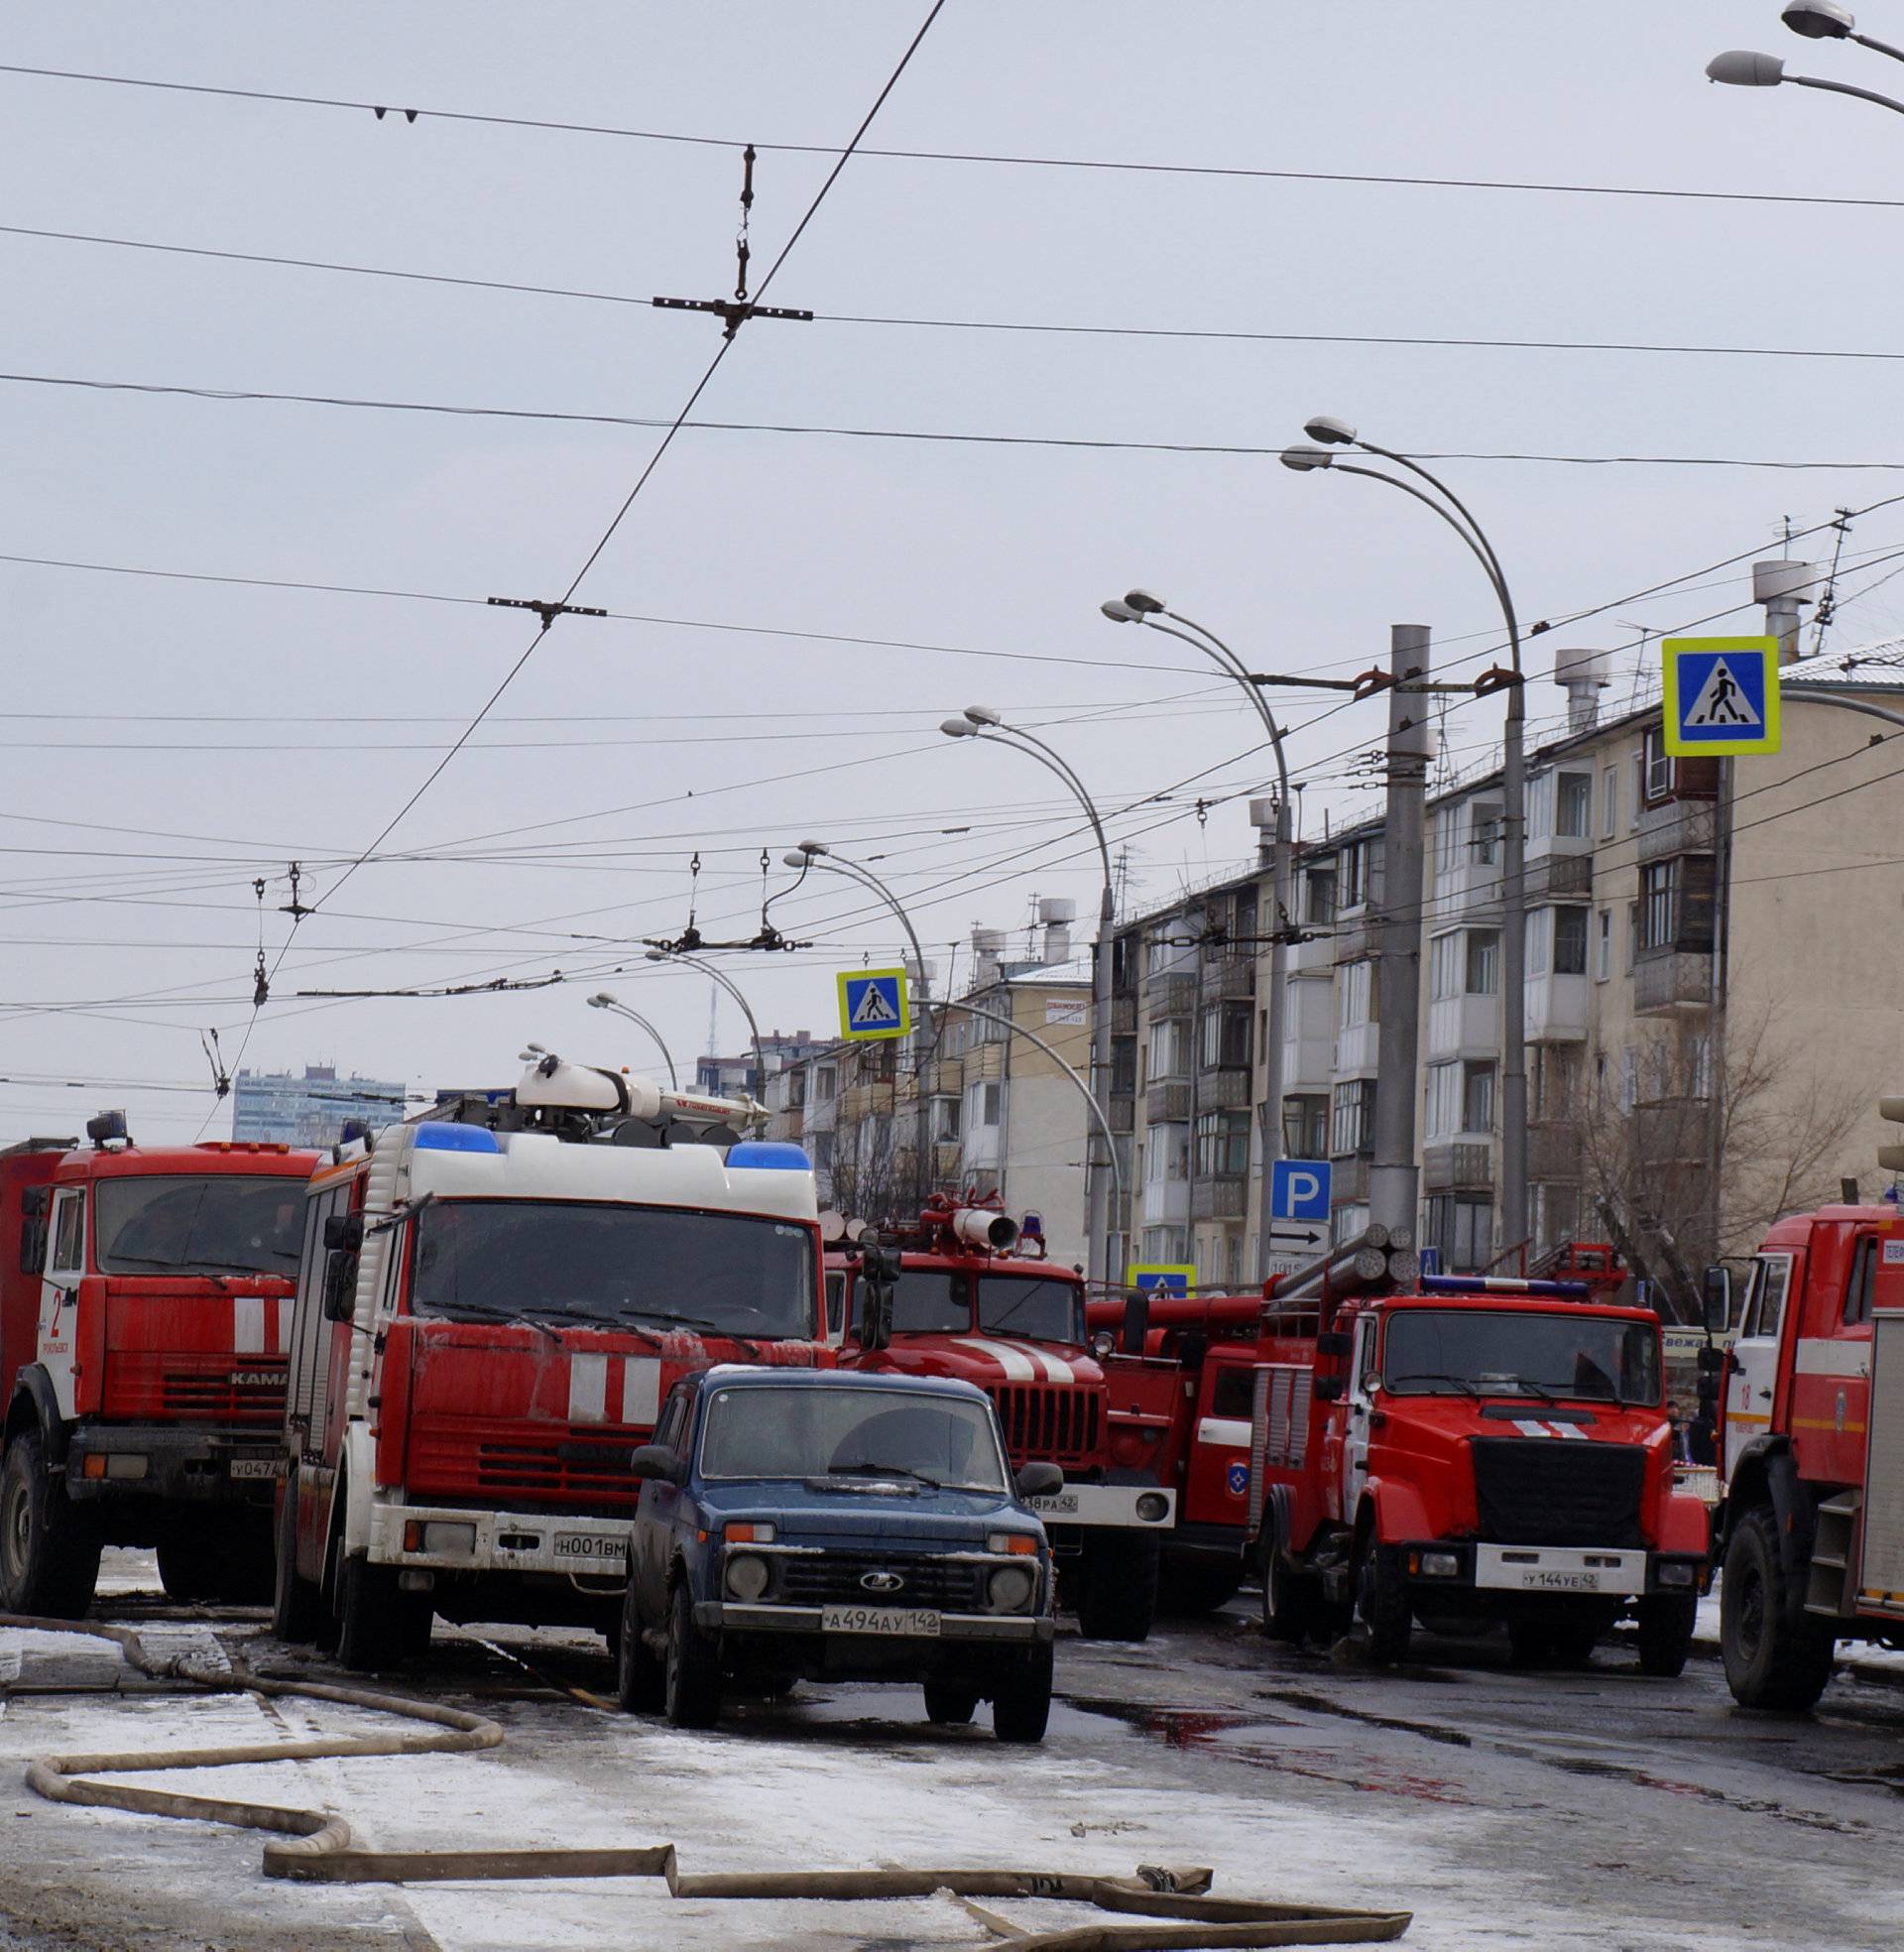 Vehicles of th Emergency Situations Ministry are seen near the scene of a fire in a shopping mall in Kemerov